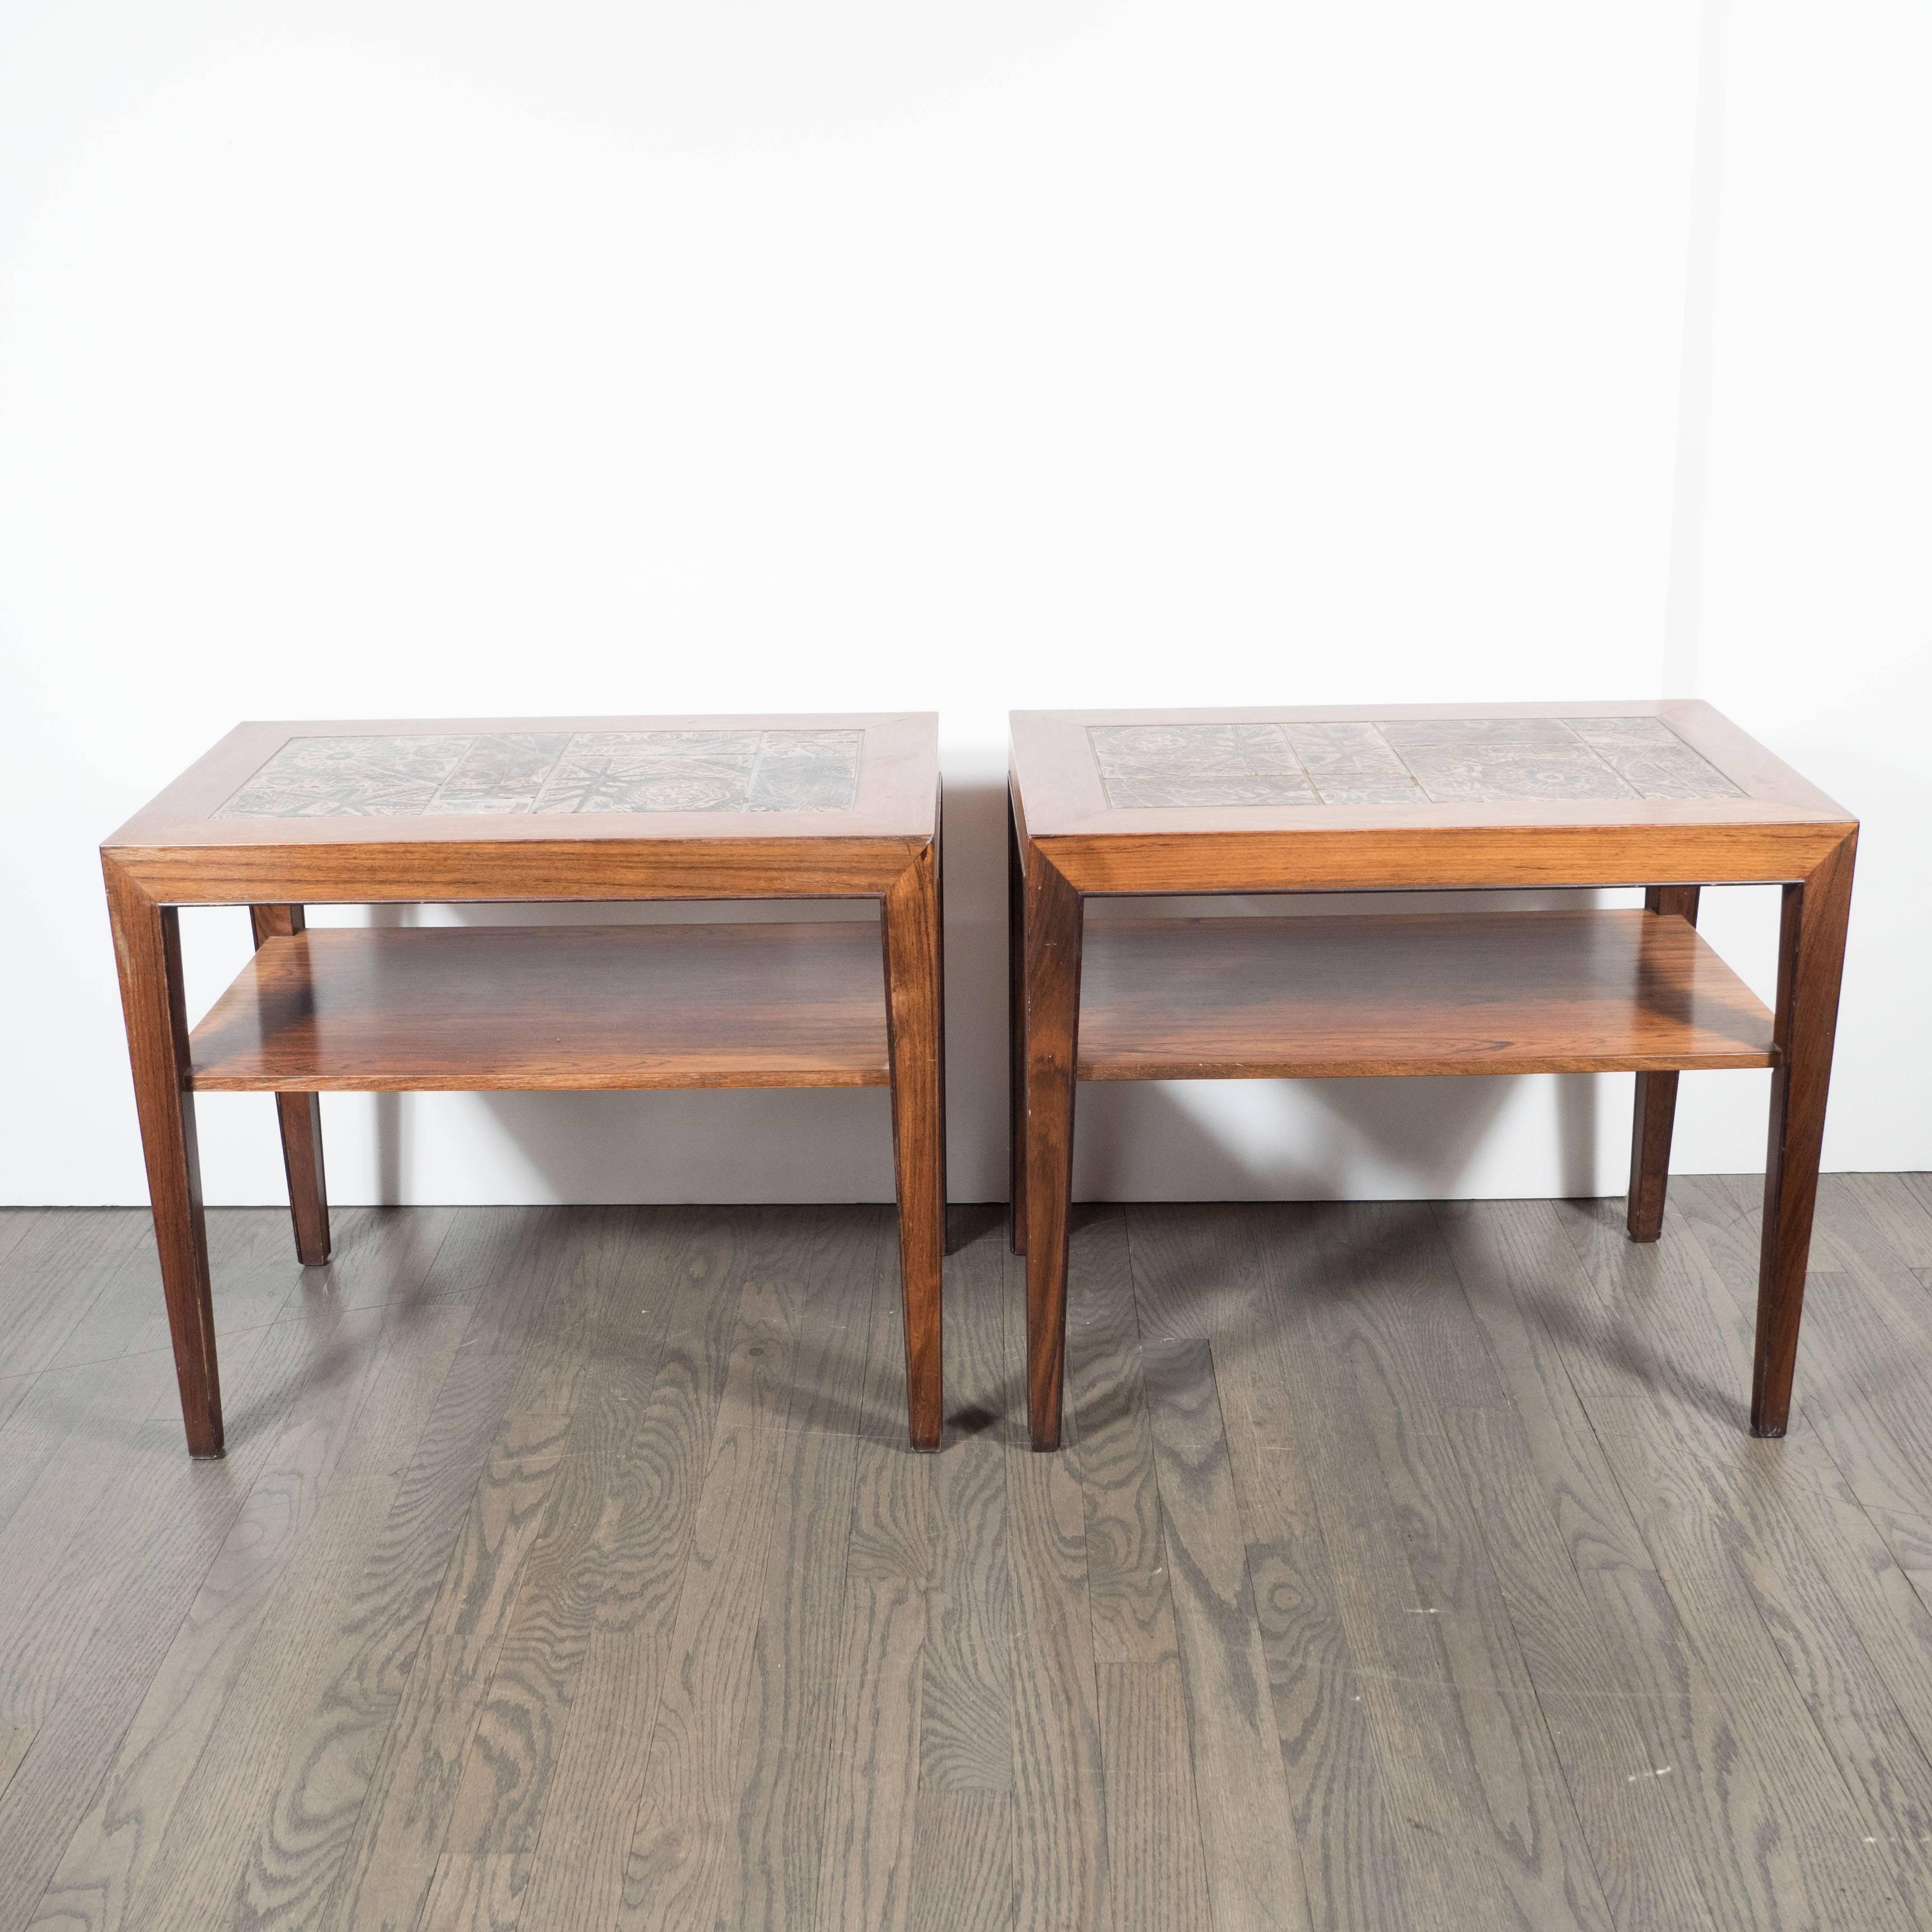 A pair of Mid-Century end tables in rosewood with inset hand-painted Royal Copenhagen tiles. Slightly tapered legs each hold a lower shelf. The tops of each display a series of hand-painted Royal Copenhagen tiles, featuring various earth-toned